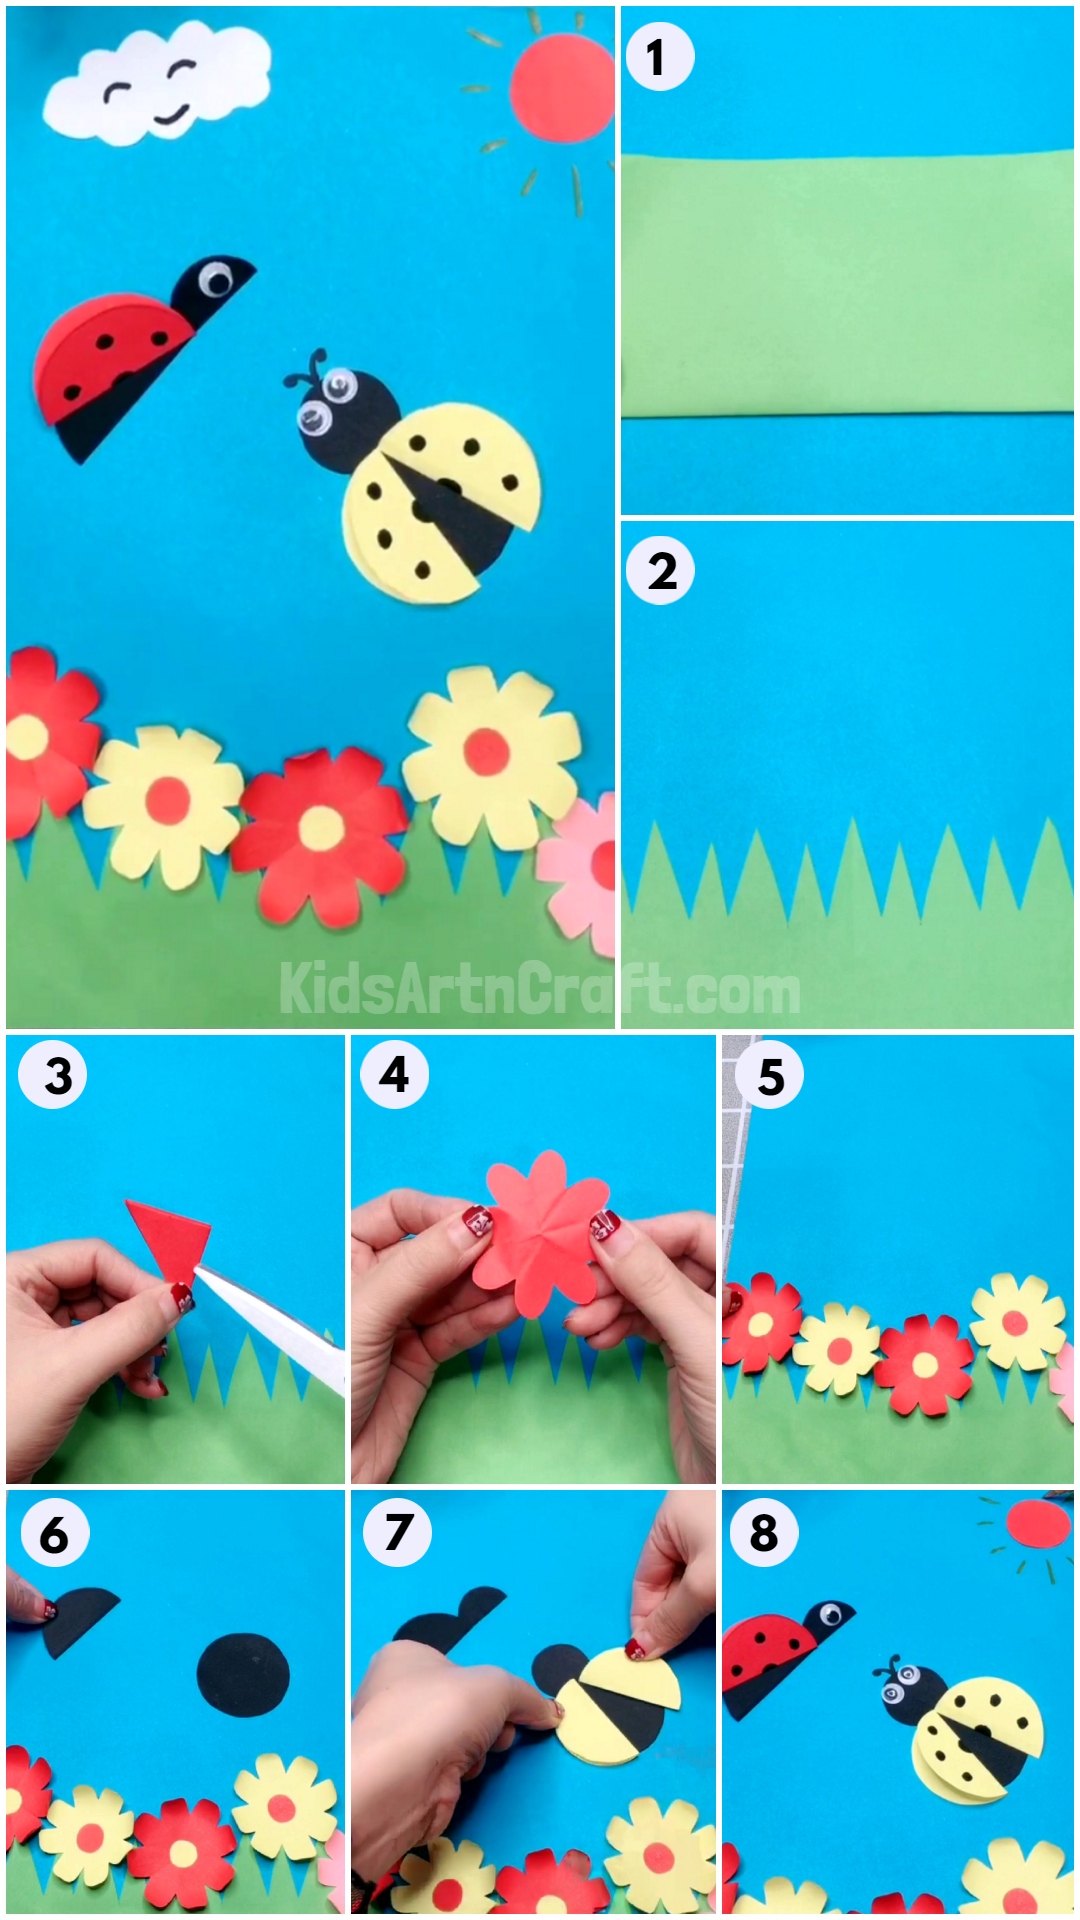 Flower & Ladybug Paper Craft For Spring Season - Step by Step Instructions